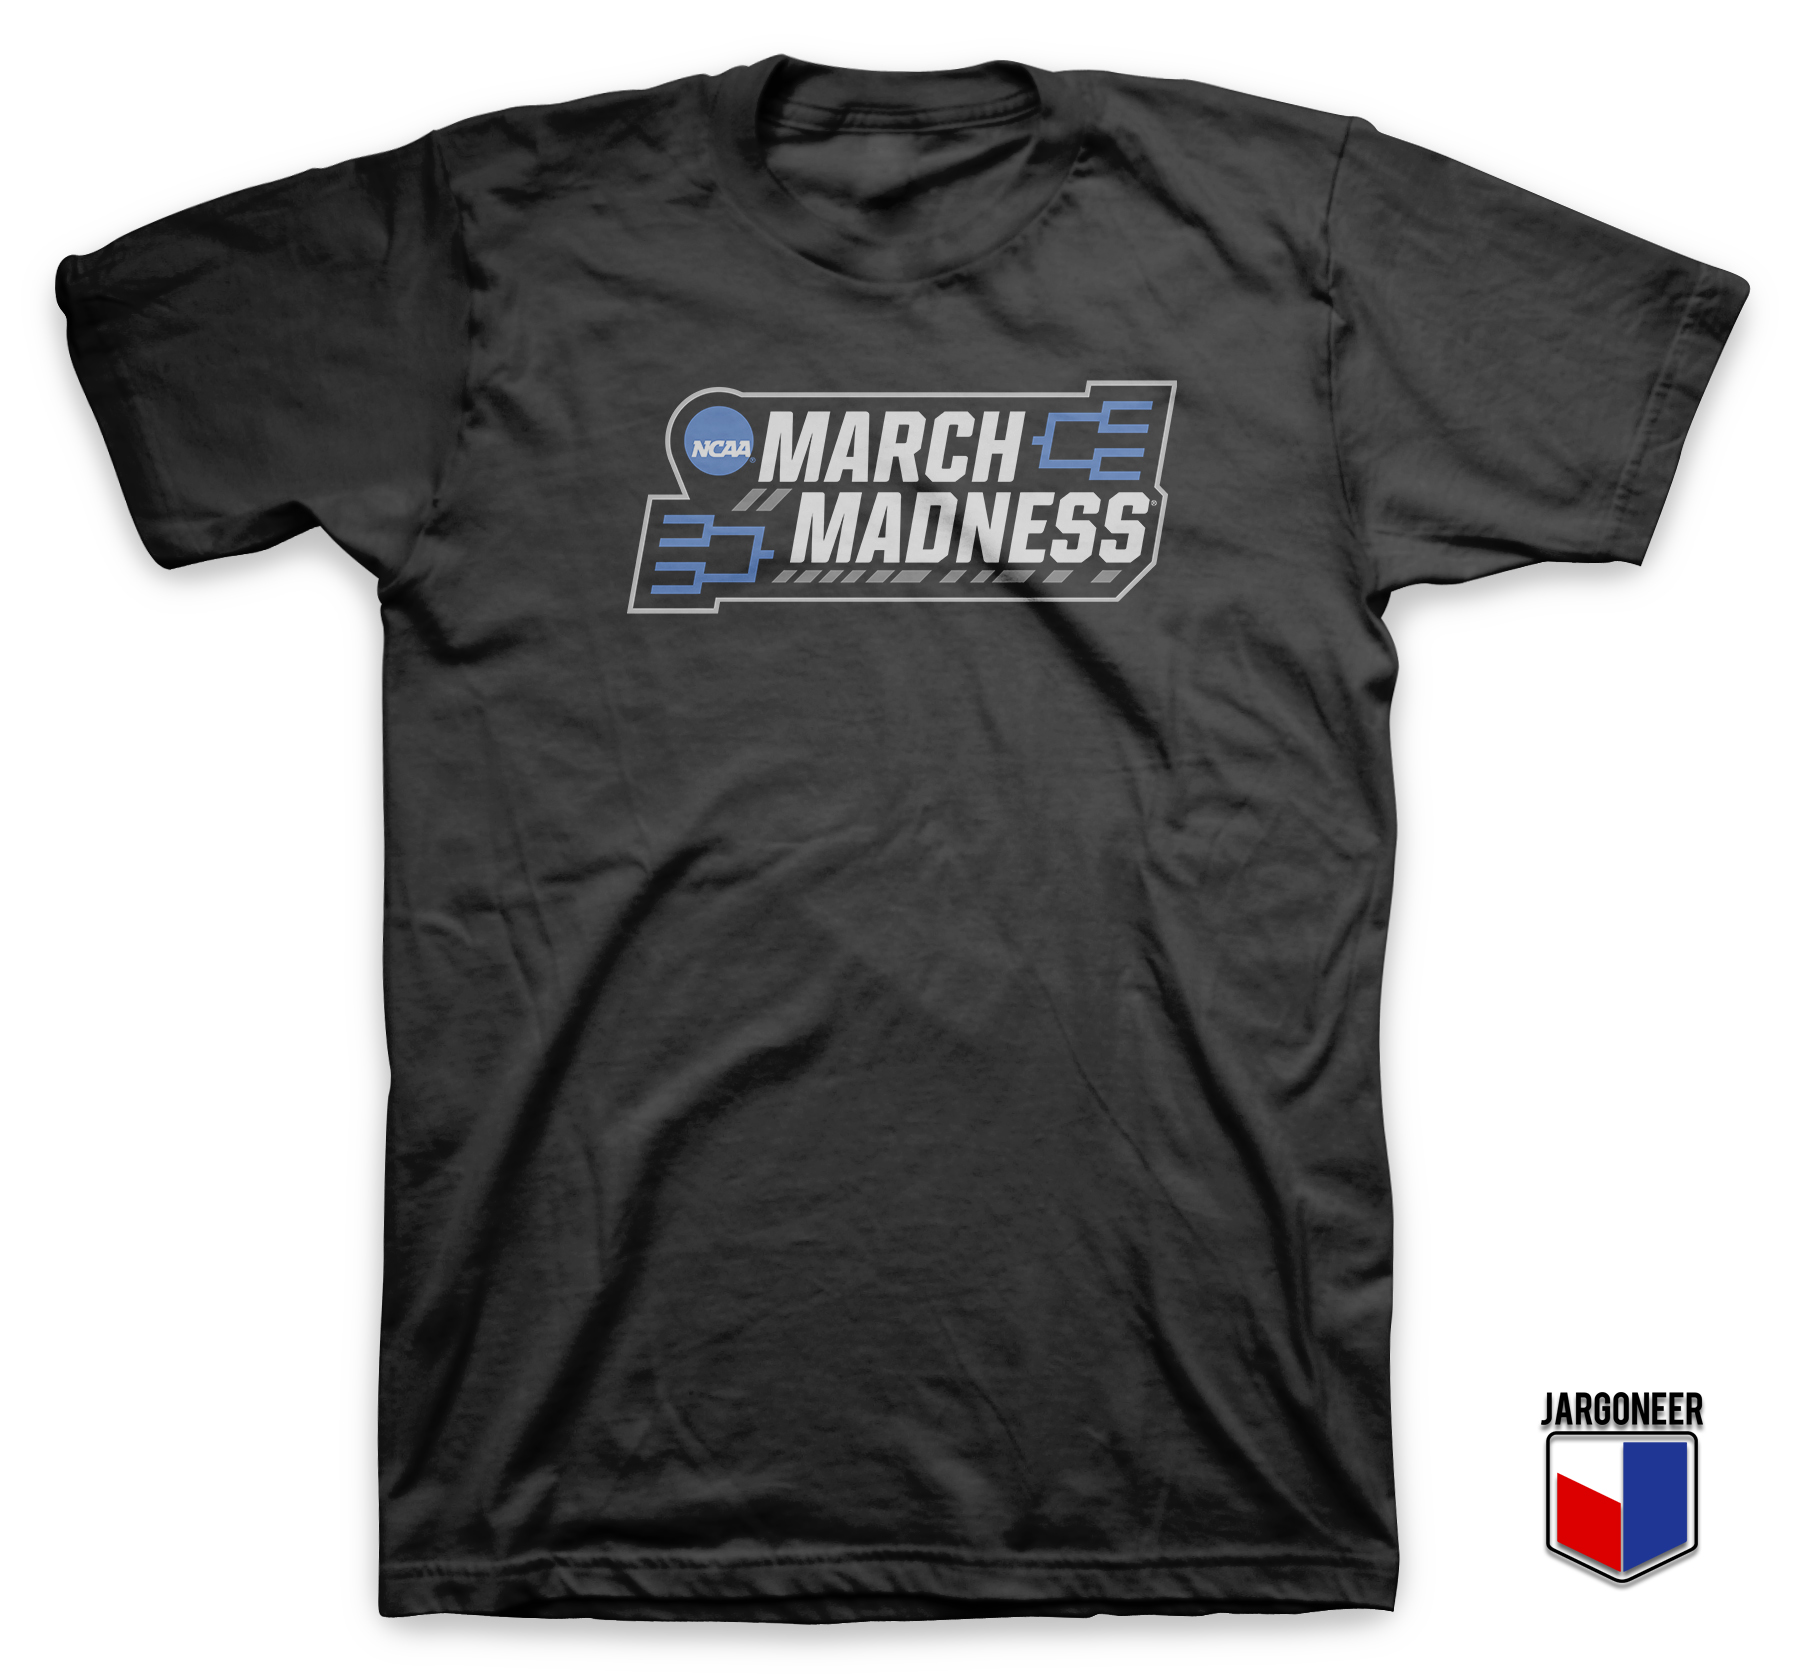 NCAA March Madness - Shop Unique Graphic Cool Shirt Designs